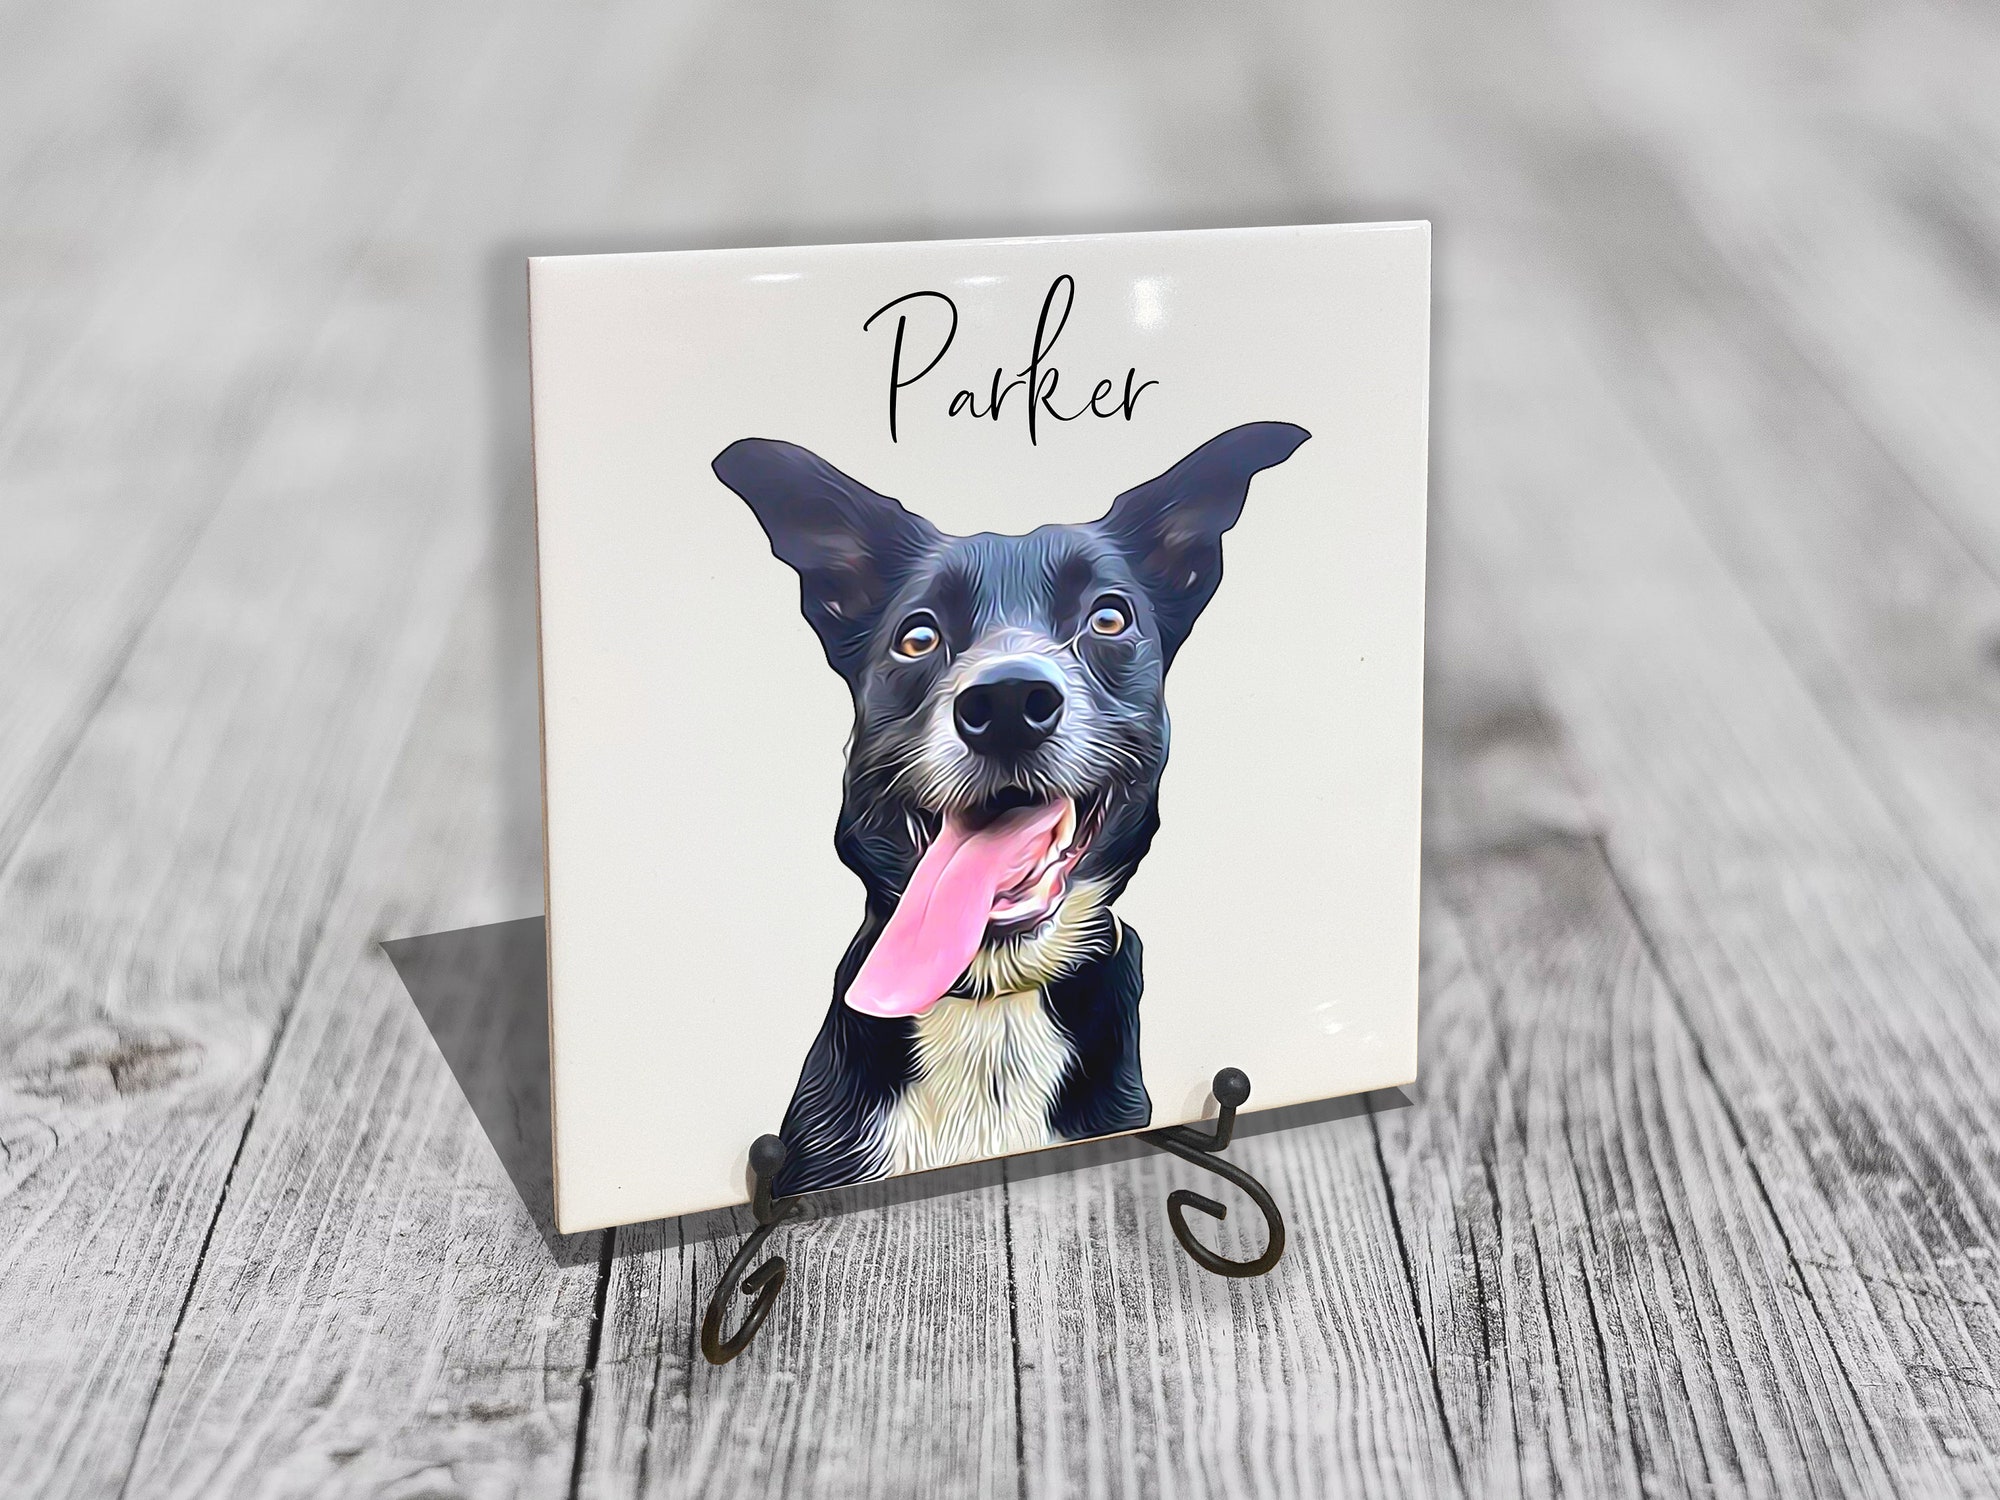 Personalised Pet Portrait on Tile with Stand - Dog Cat Brush Custom Photo Print on CERAMIC TILE